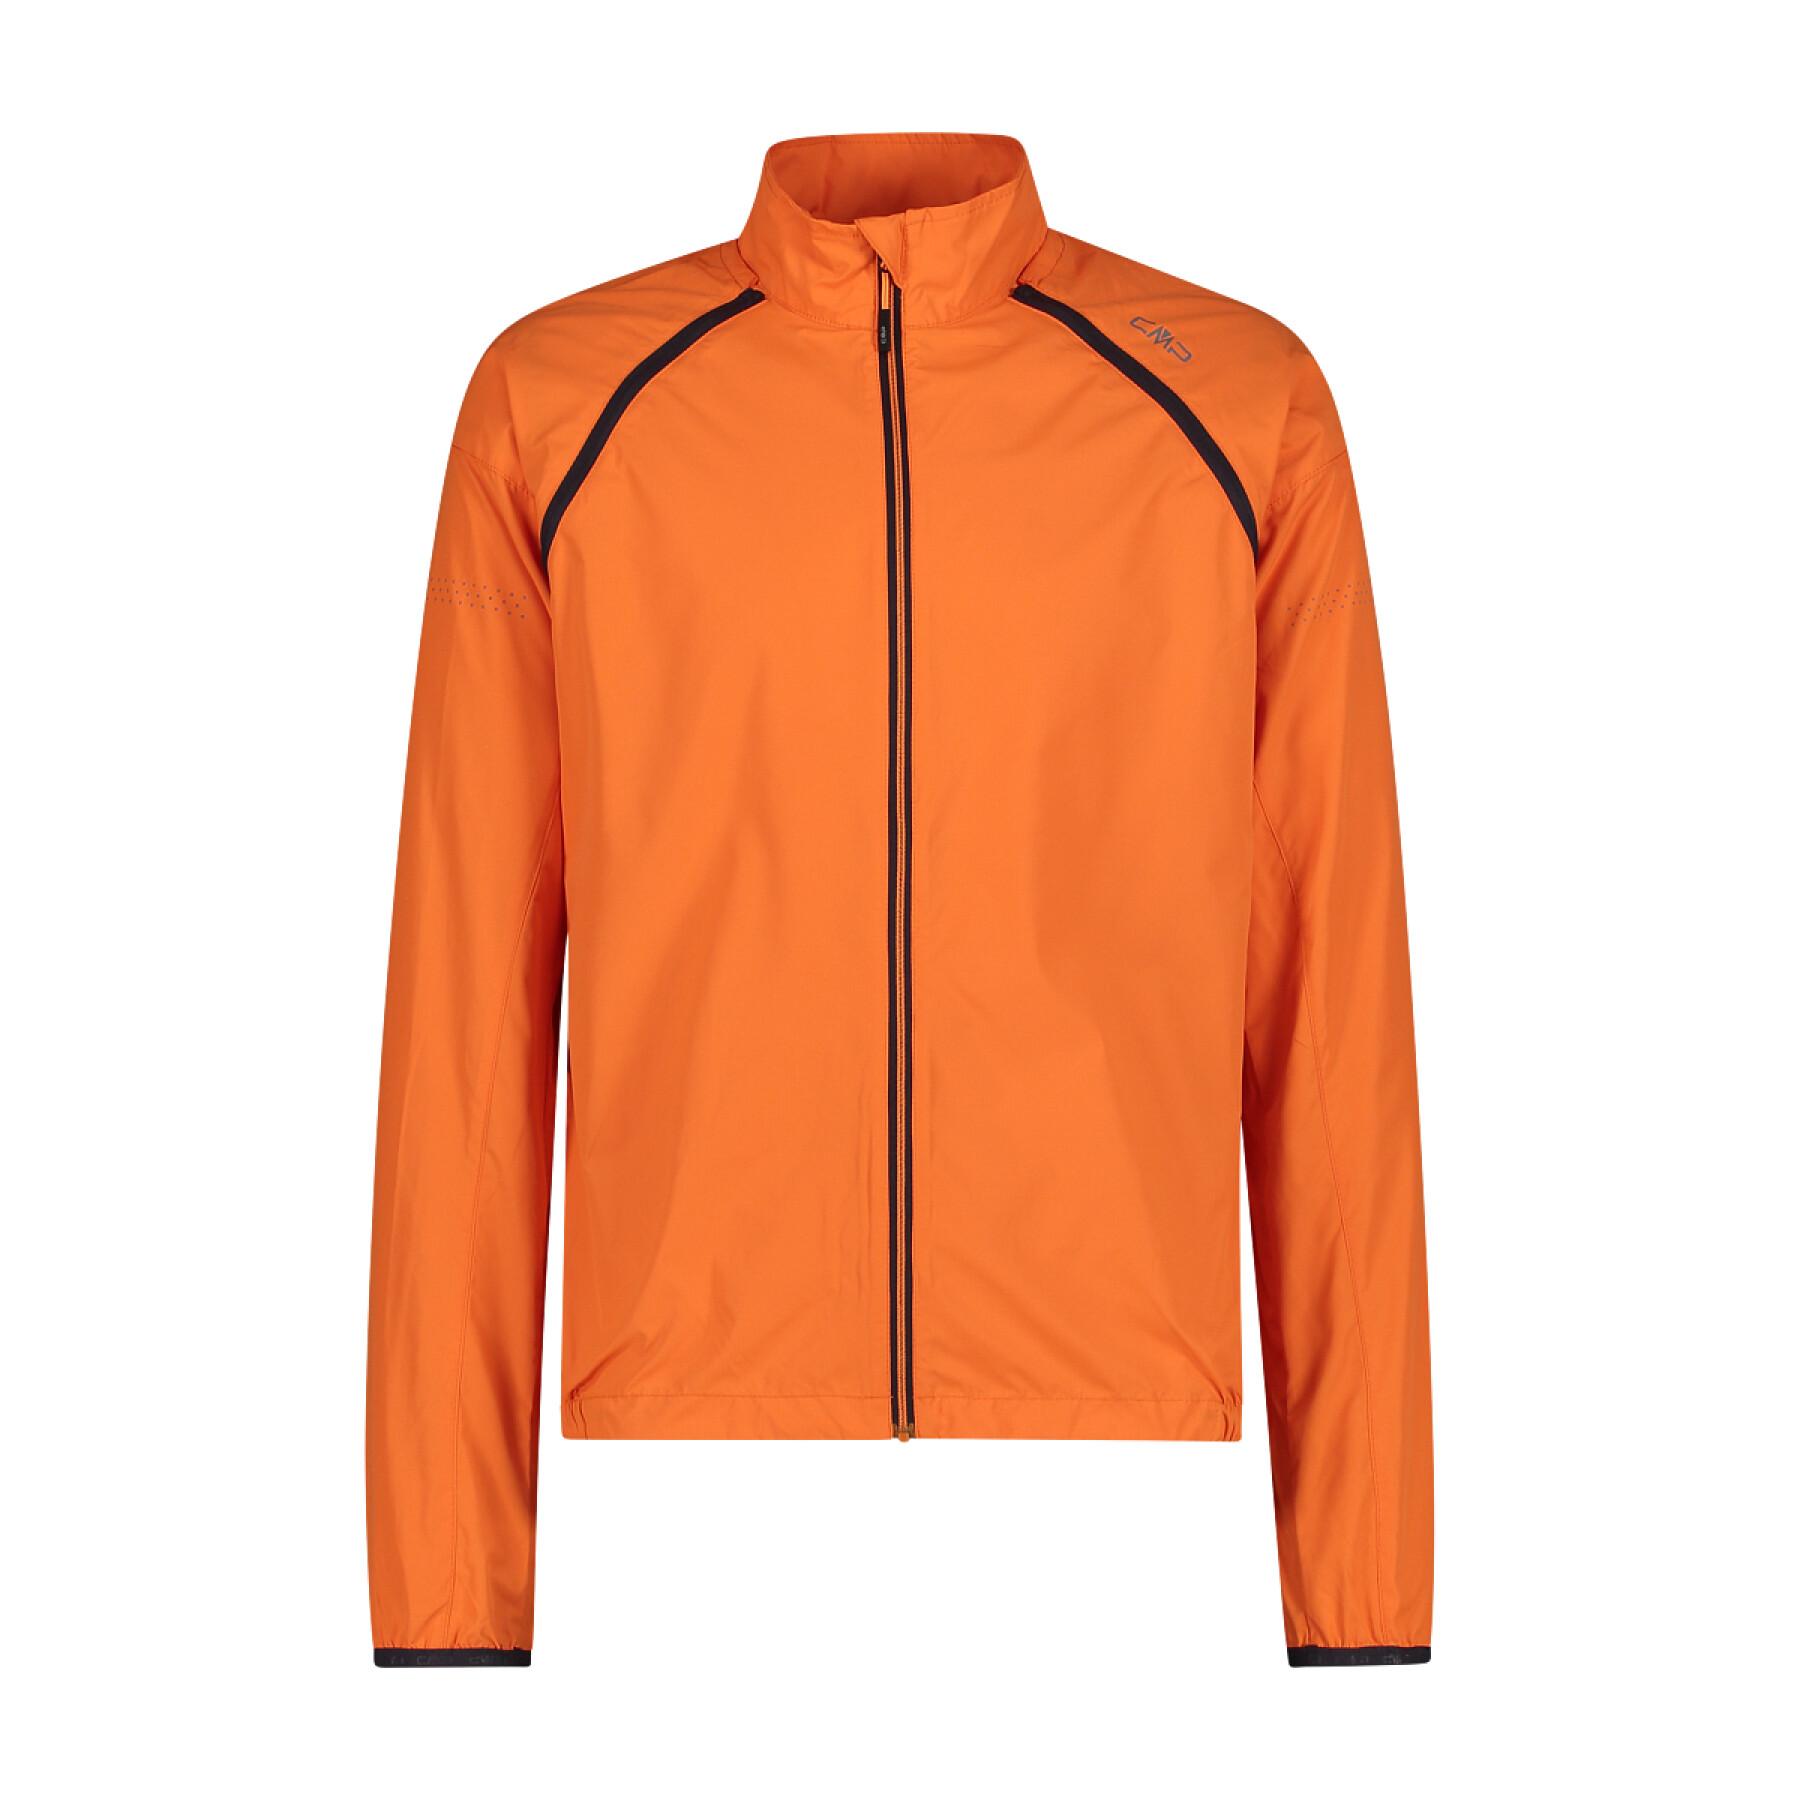 Hiking jacket with removable sleeves CMP